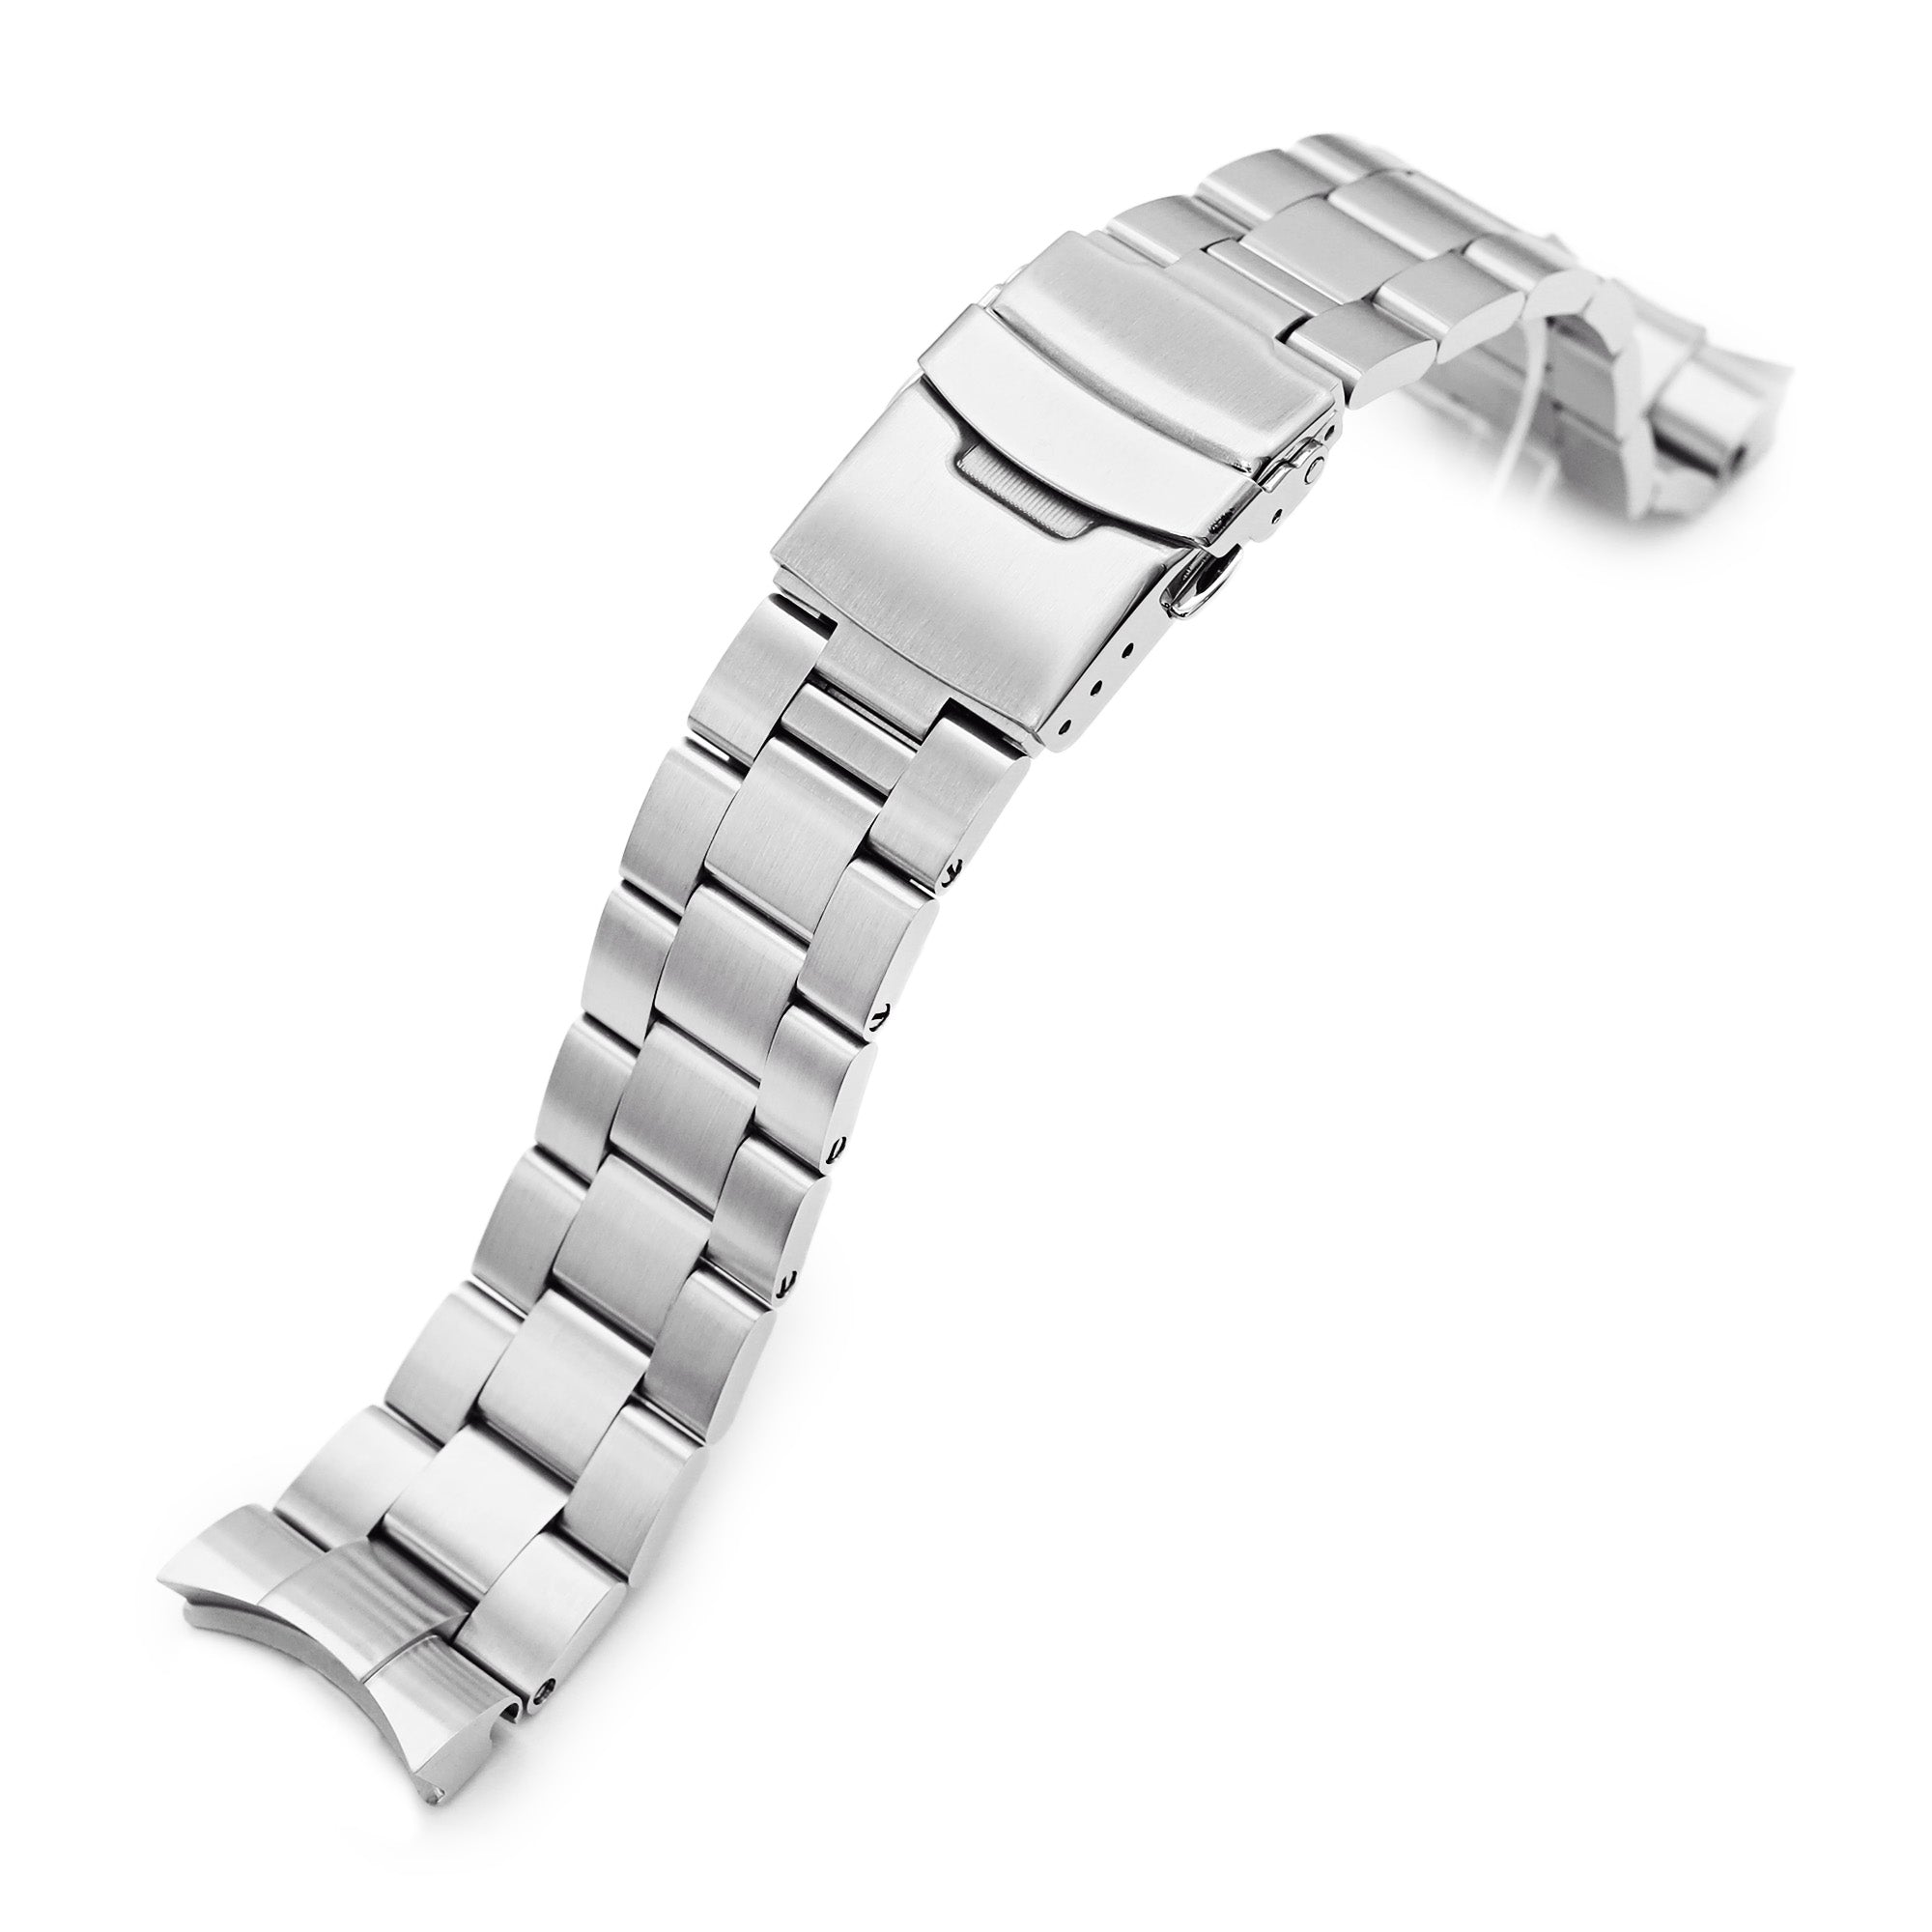 22mm Super-O Boyer Watch Bracelet for SEIKO SNZF17 Sea Urchin, Diver Clasp, Brushed Strapcode Watch Bands